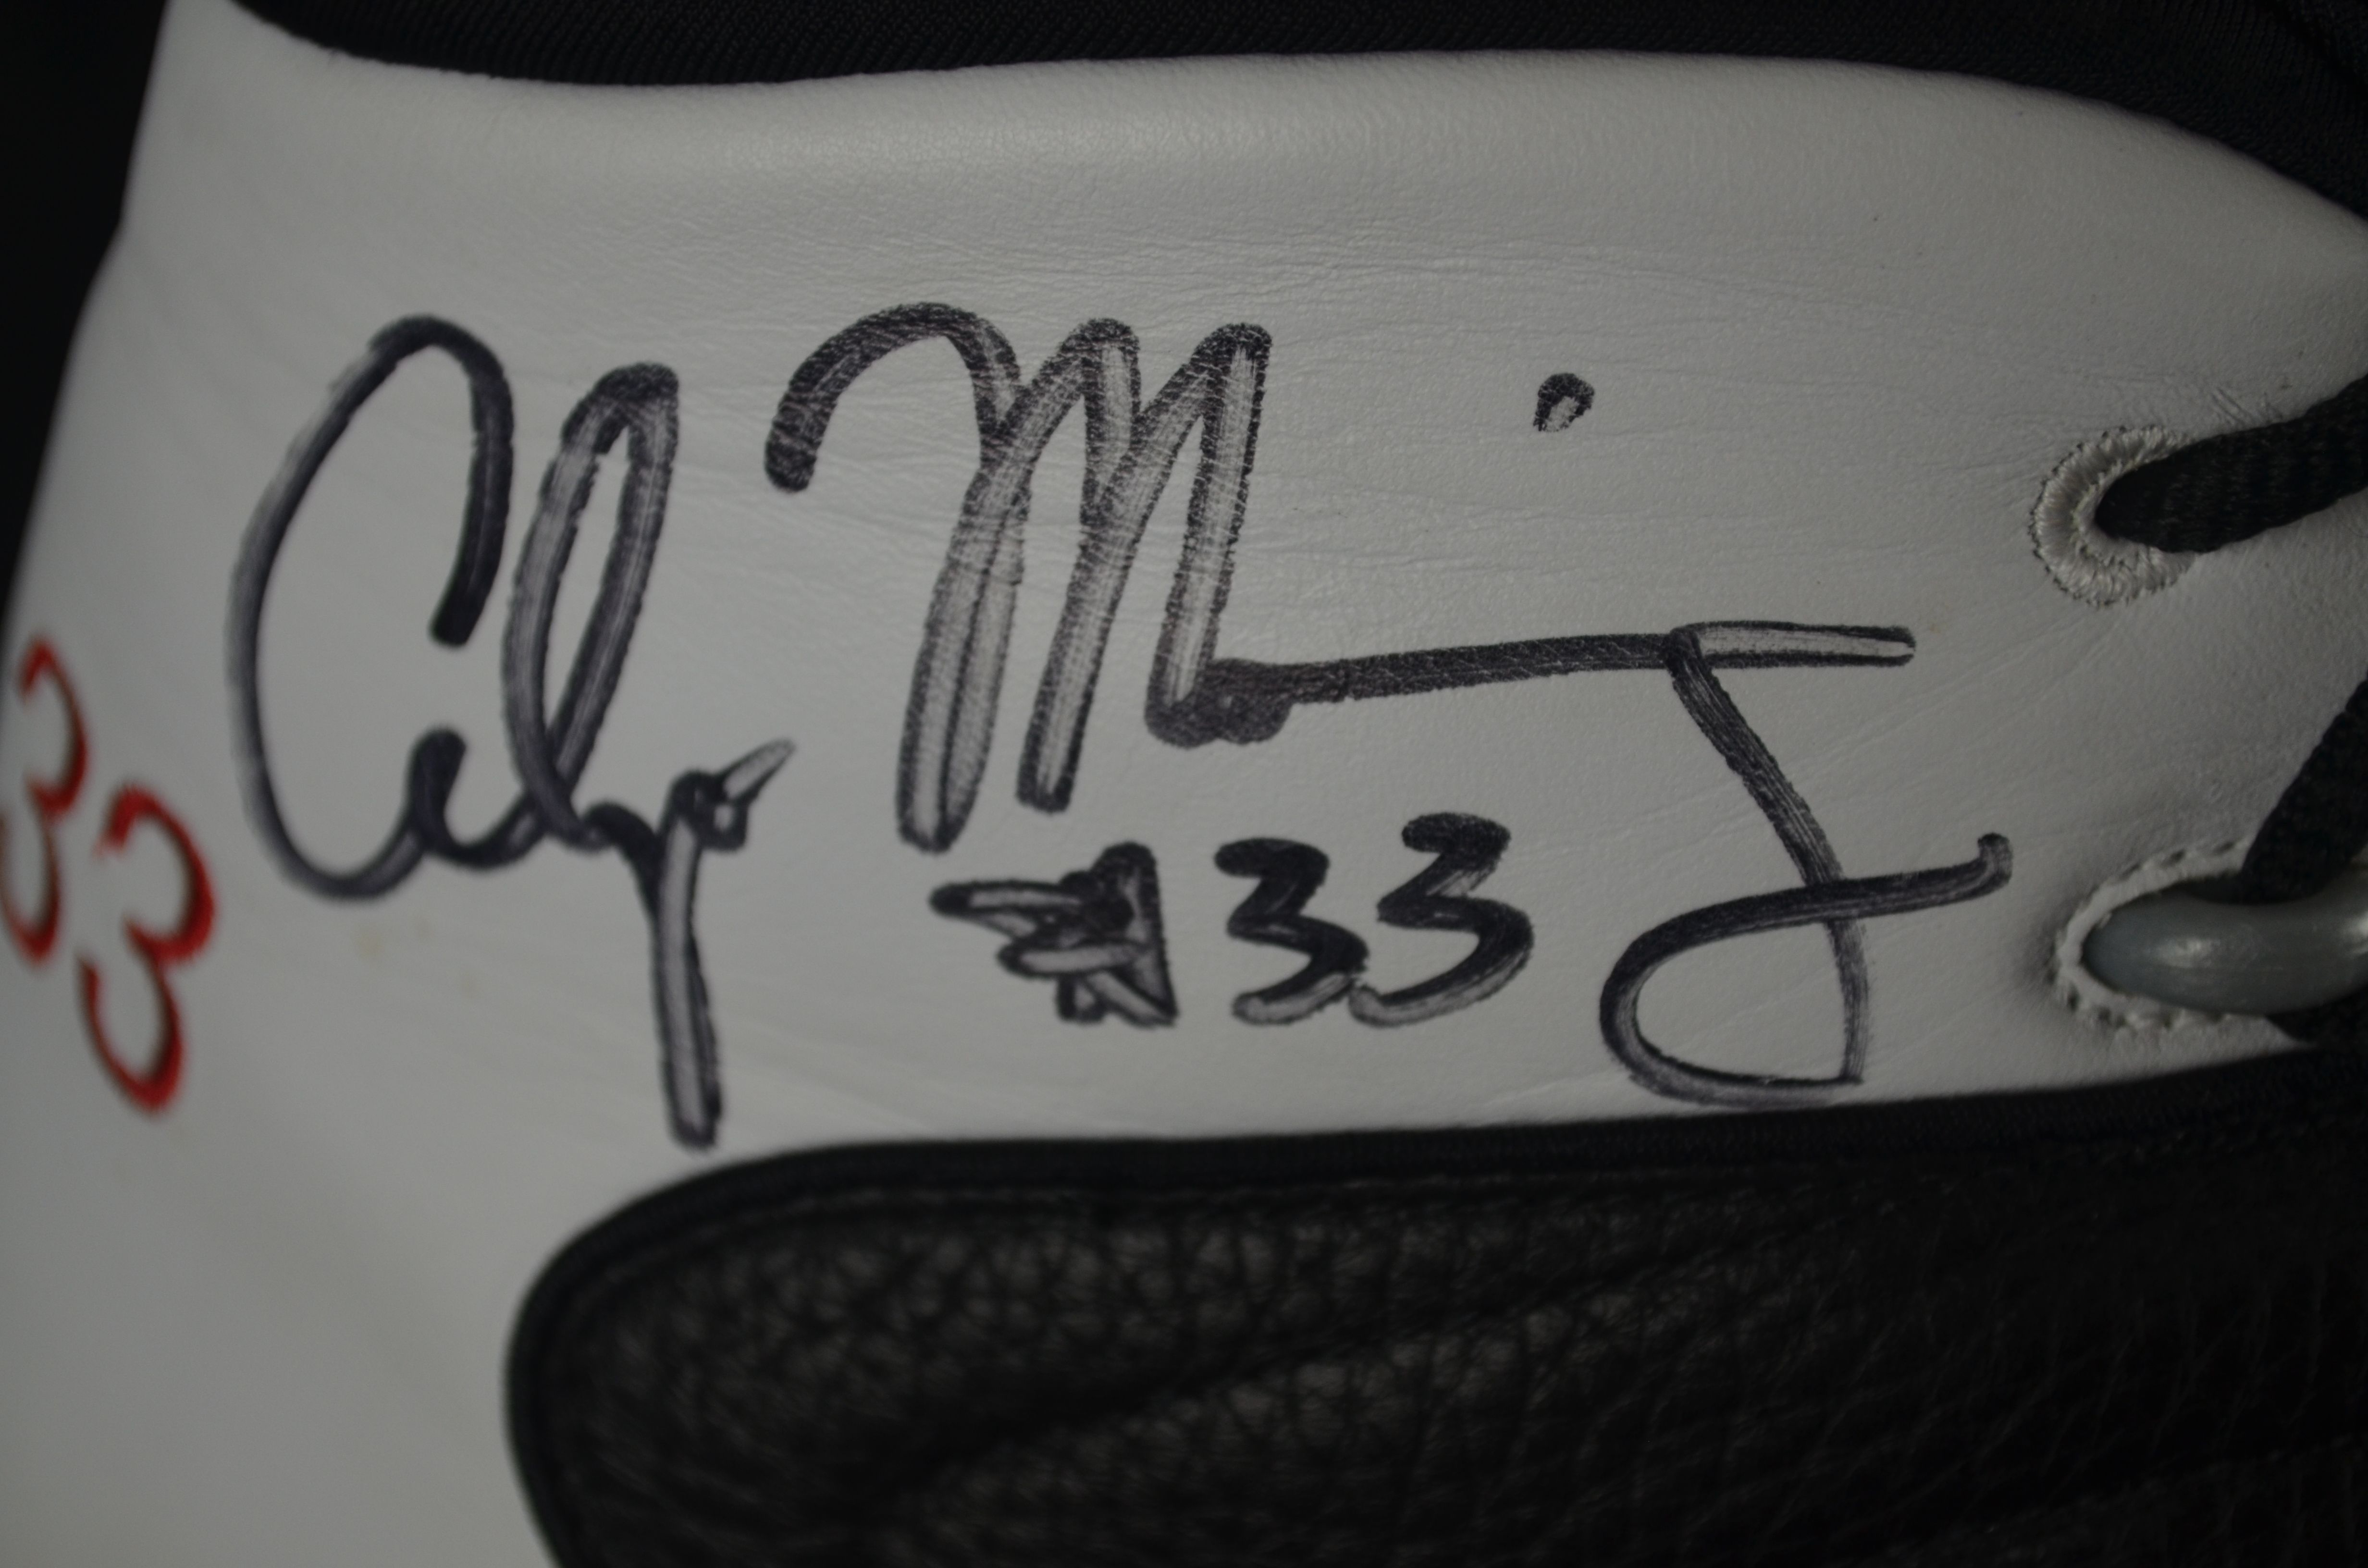 Miami Heat Alonzo Mourning Game Used Shoes Auto'd 33